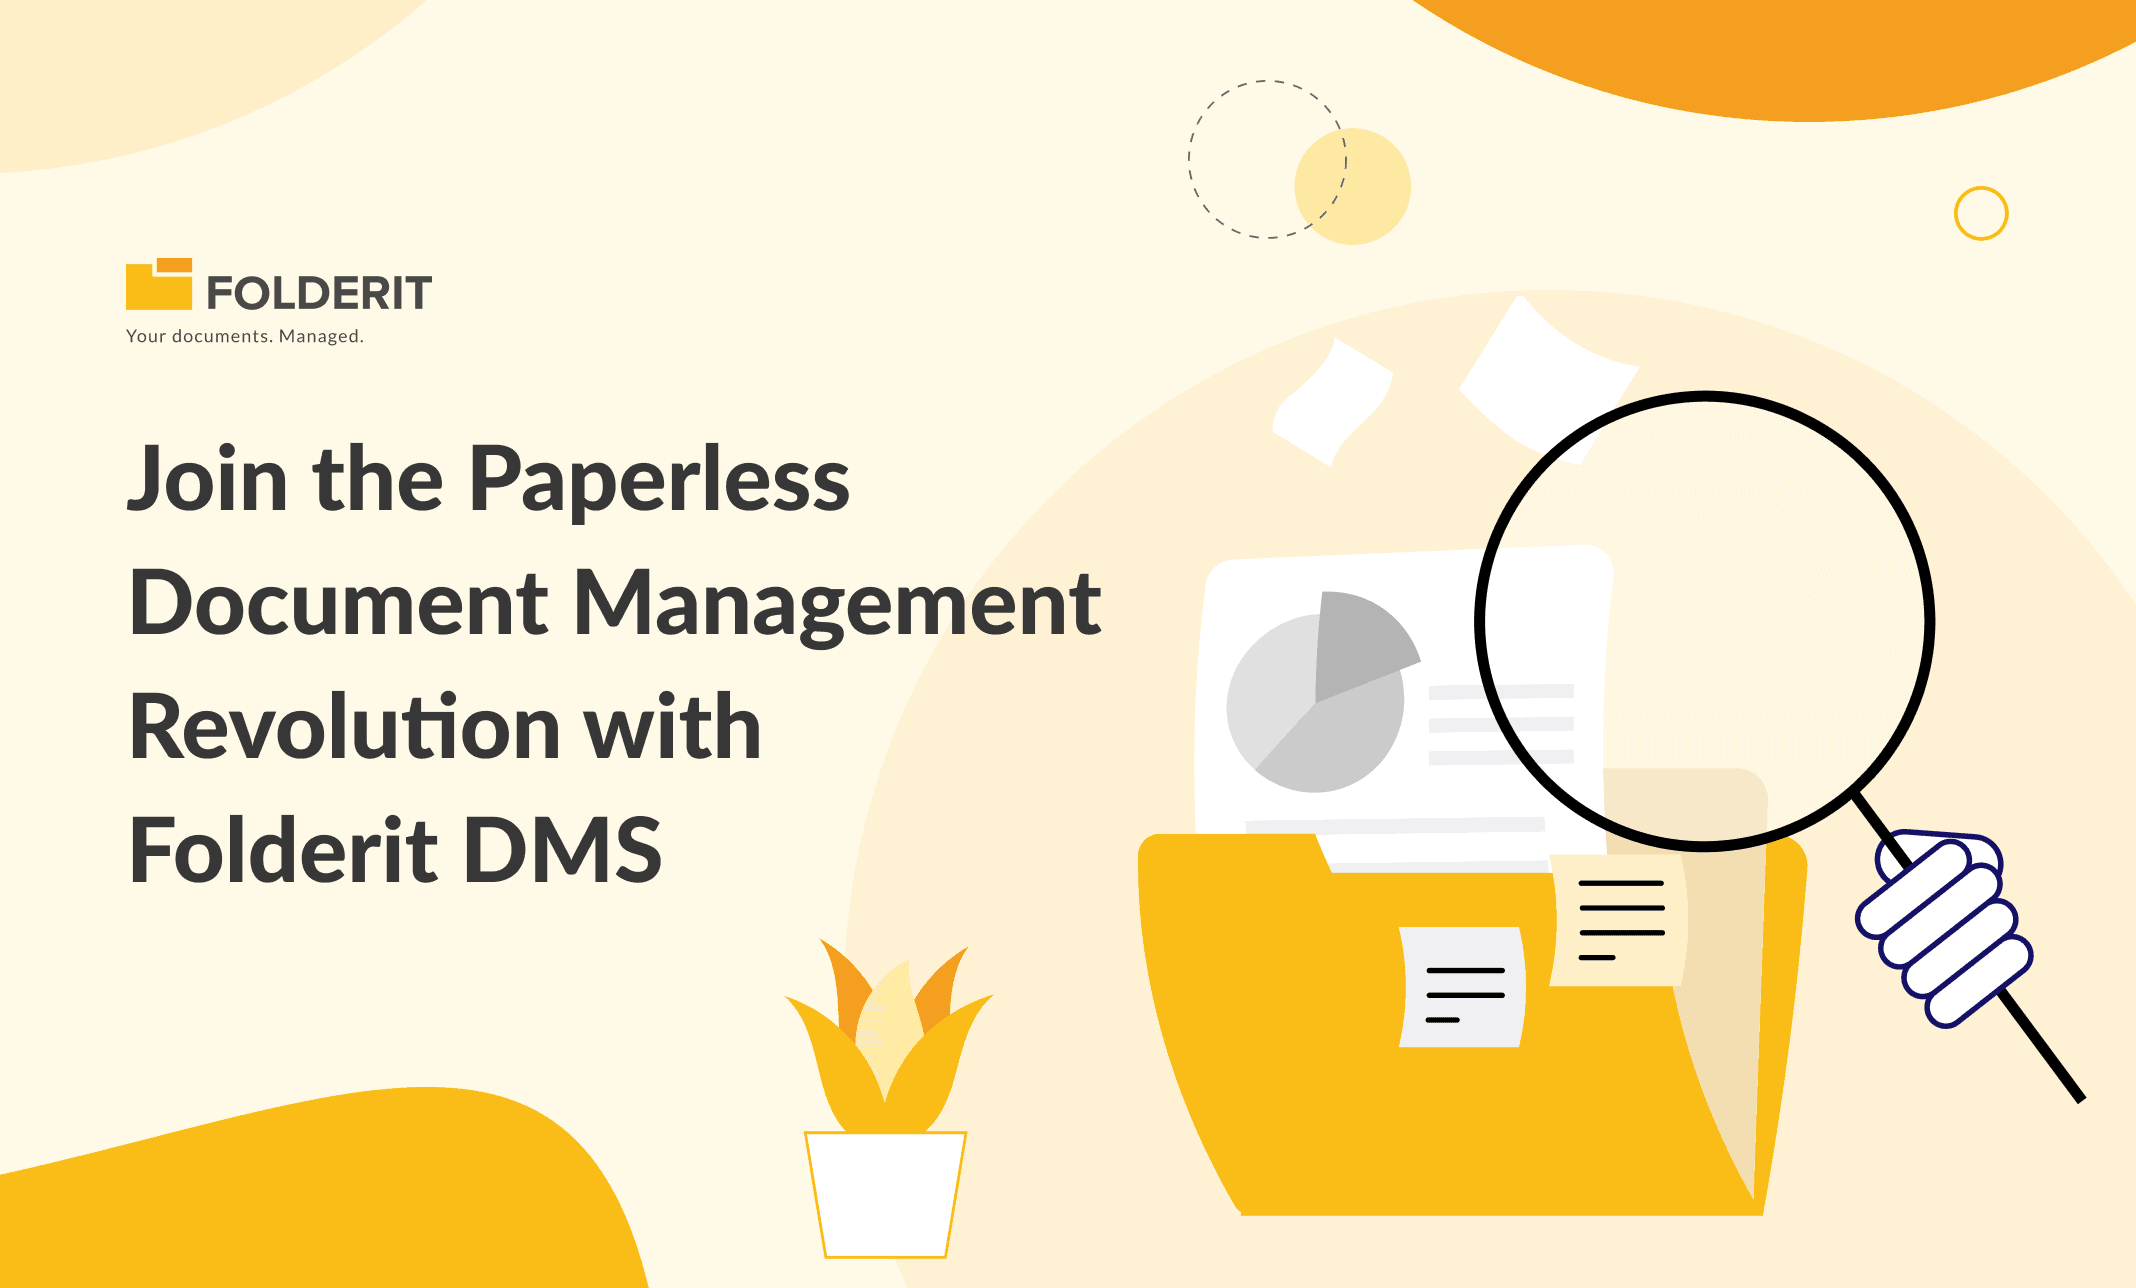 Join the Paperless Document Management Revolution with Folderit DMS